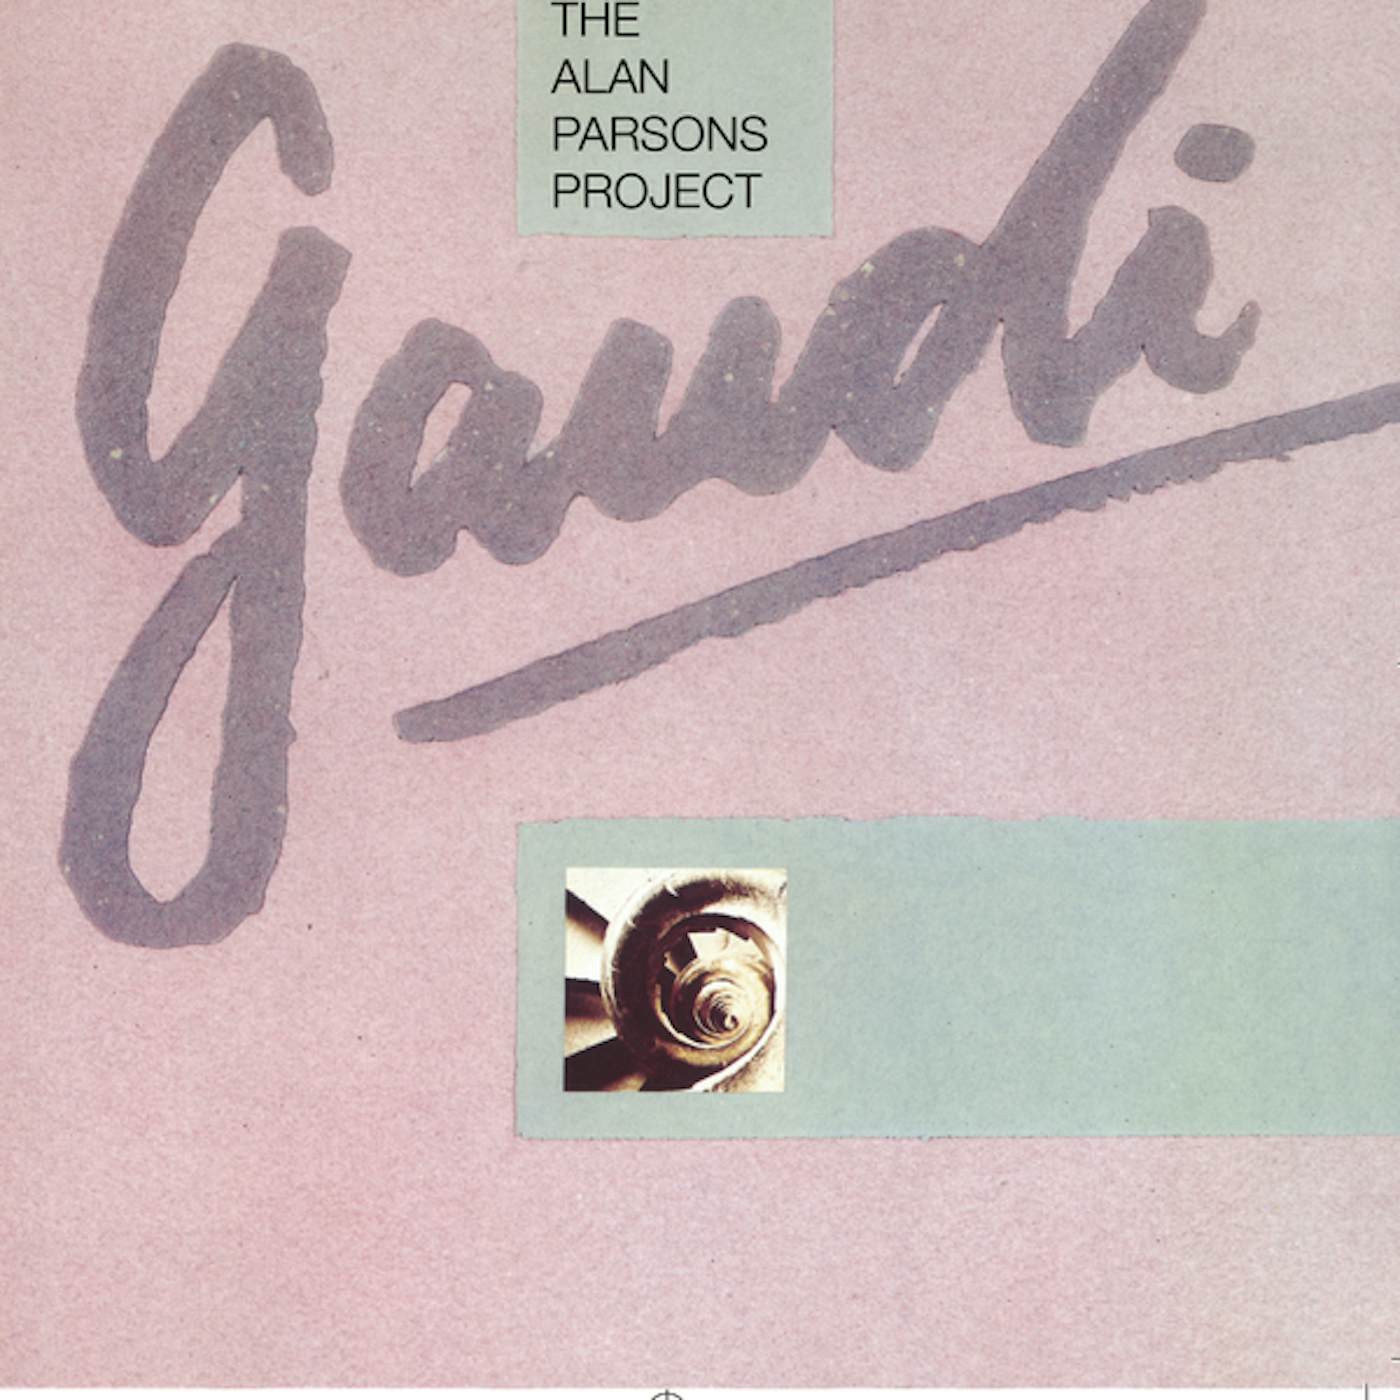 The Alan Parsons Project GAUDI CD